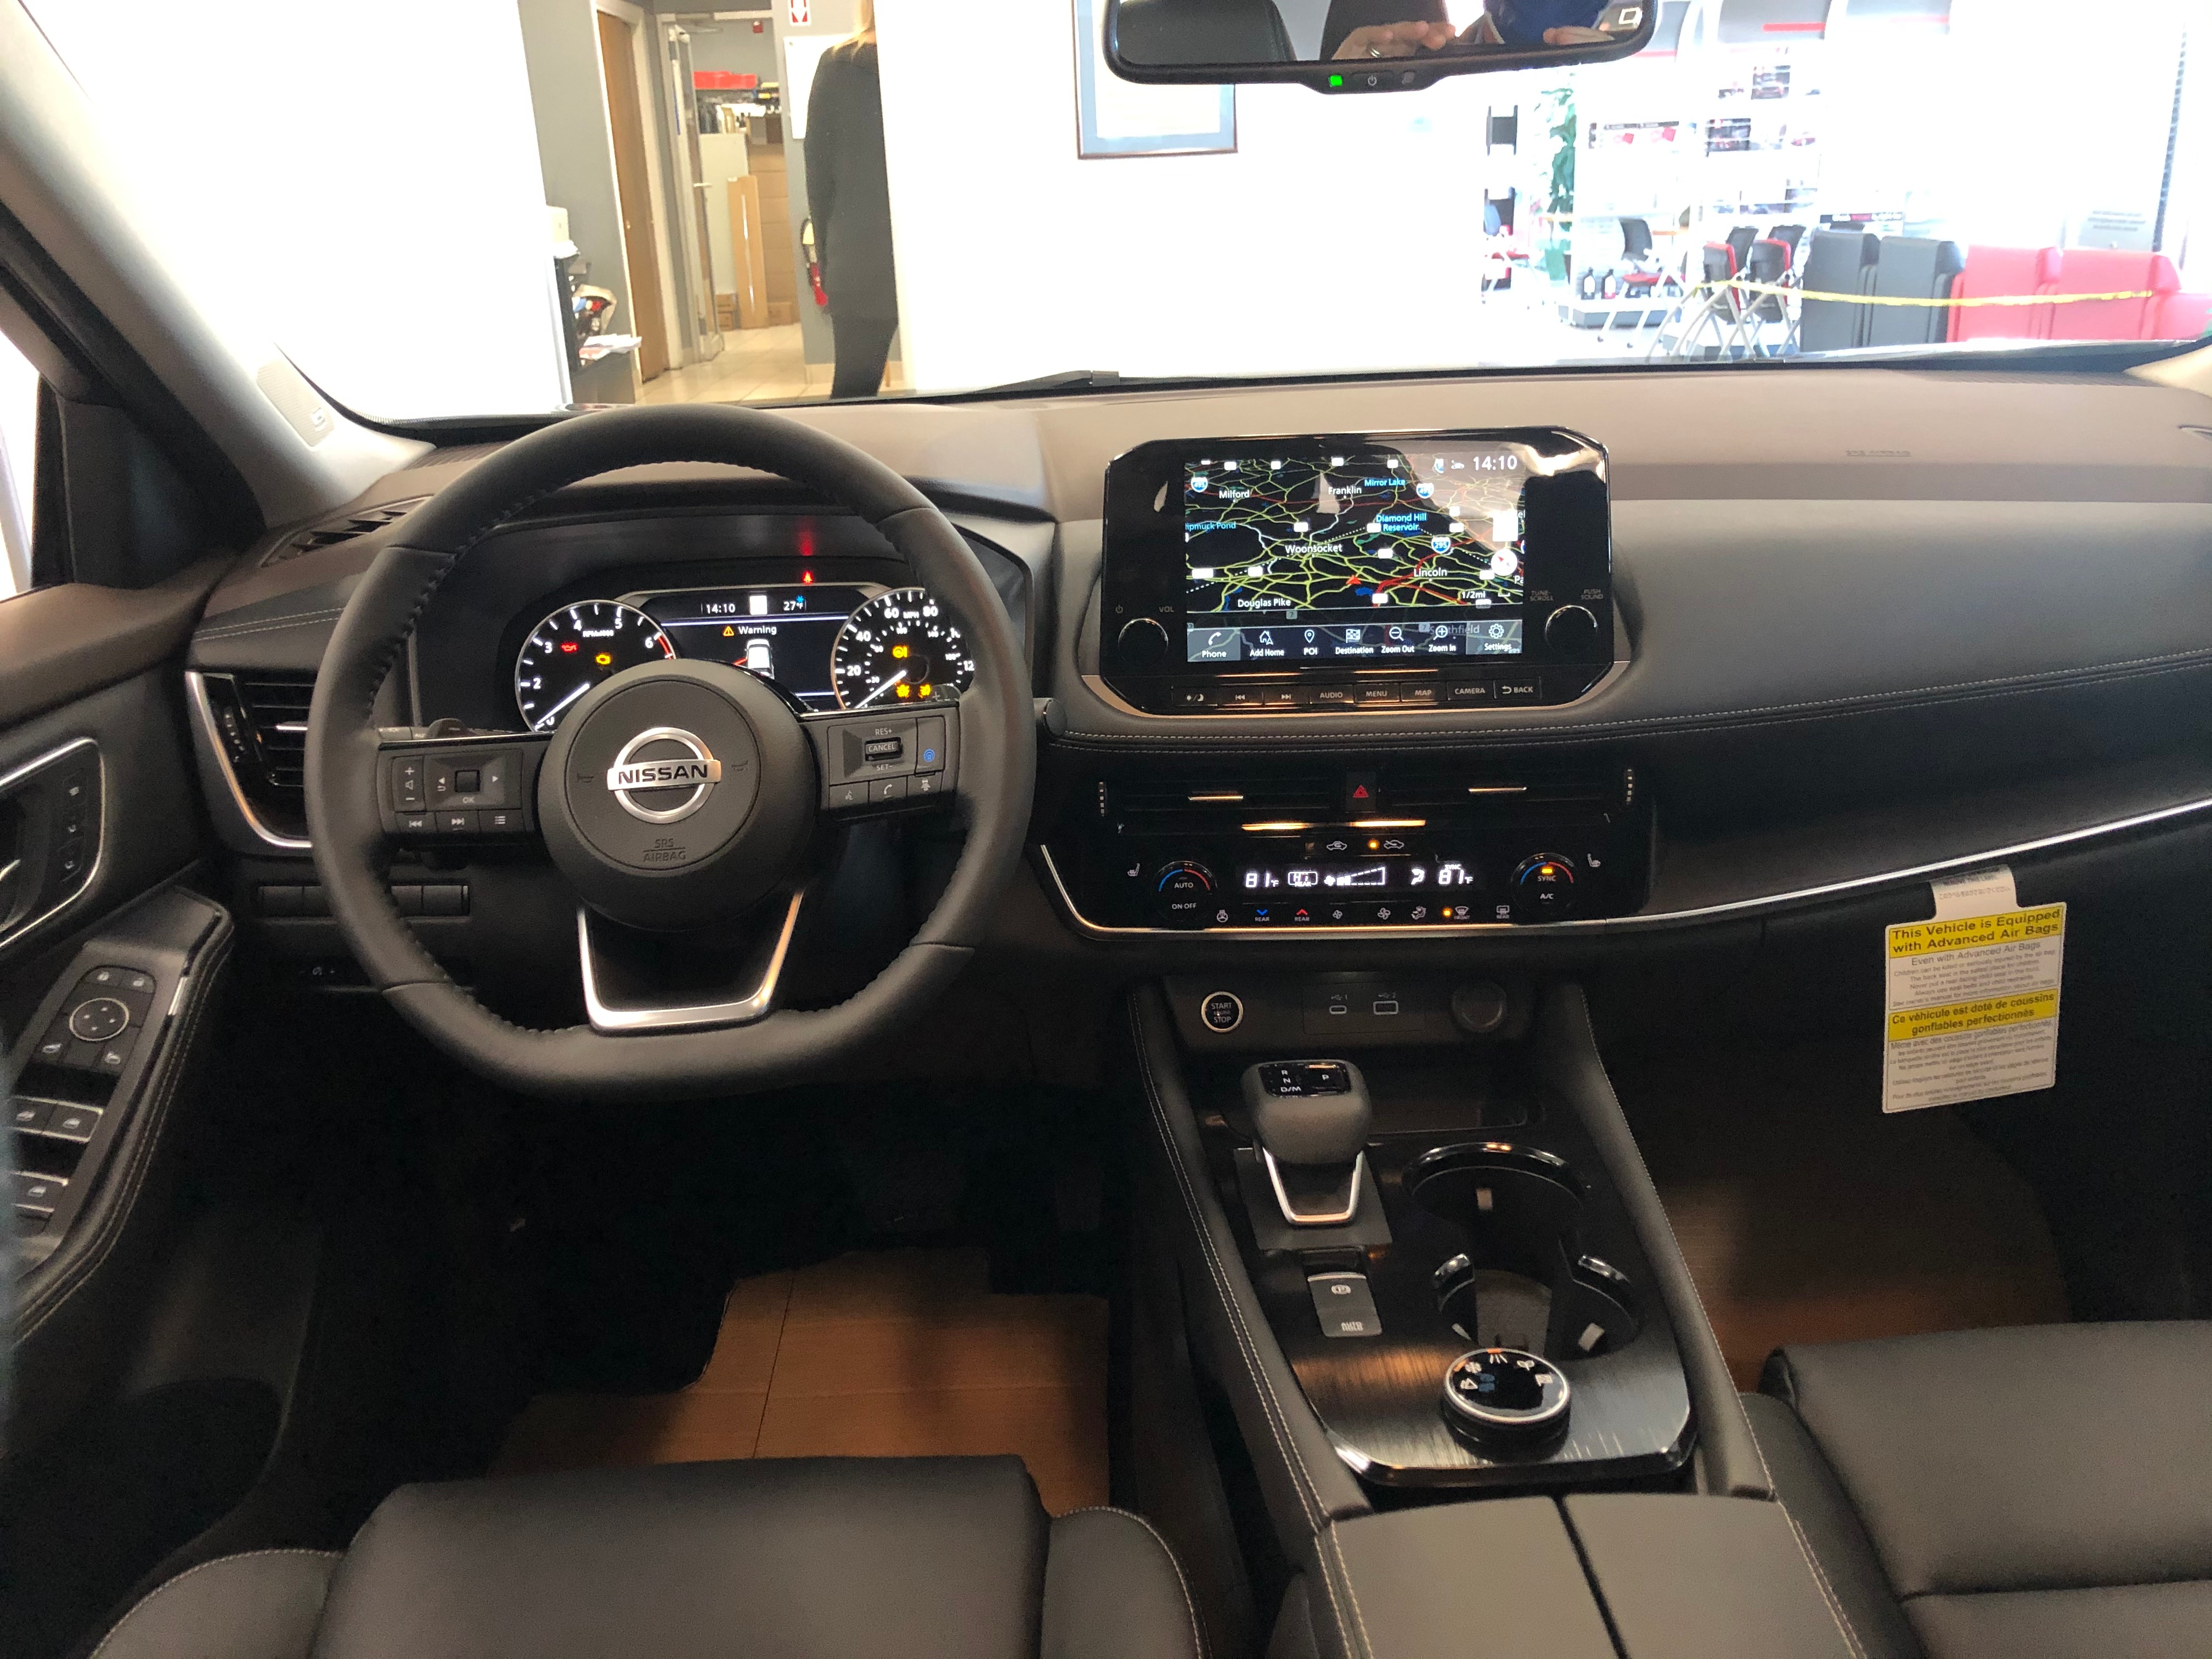 2021 Nissan Rogue Digital Dashboard and Touch screen